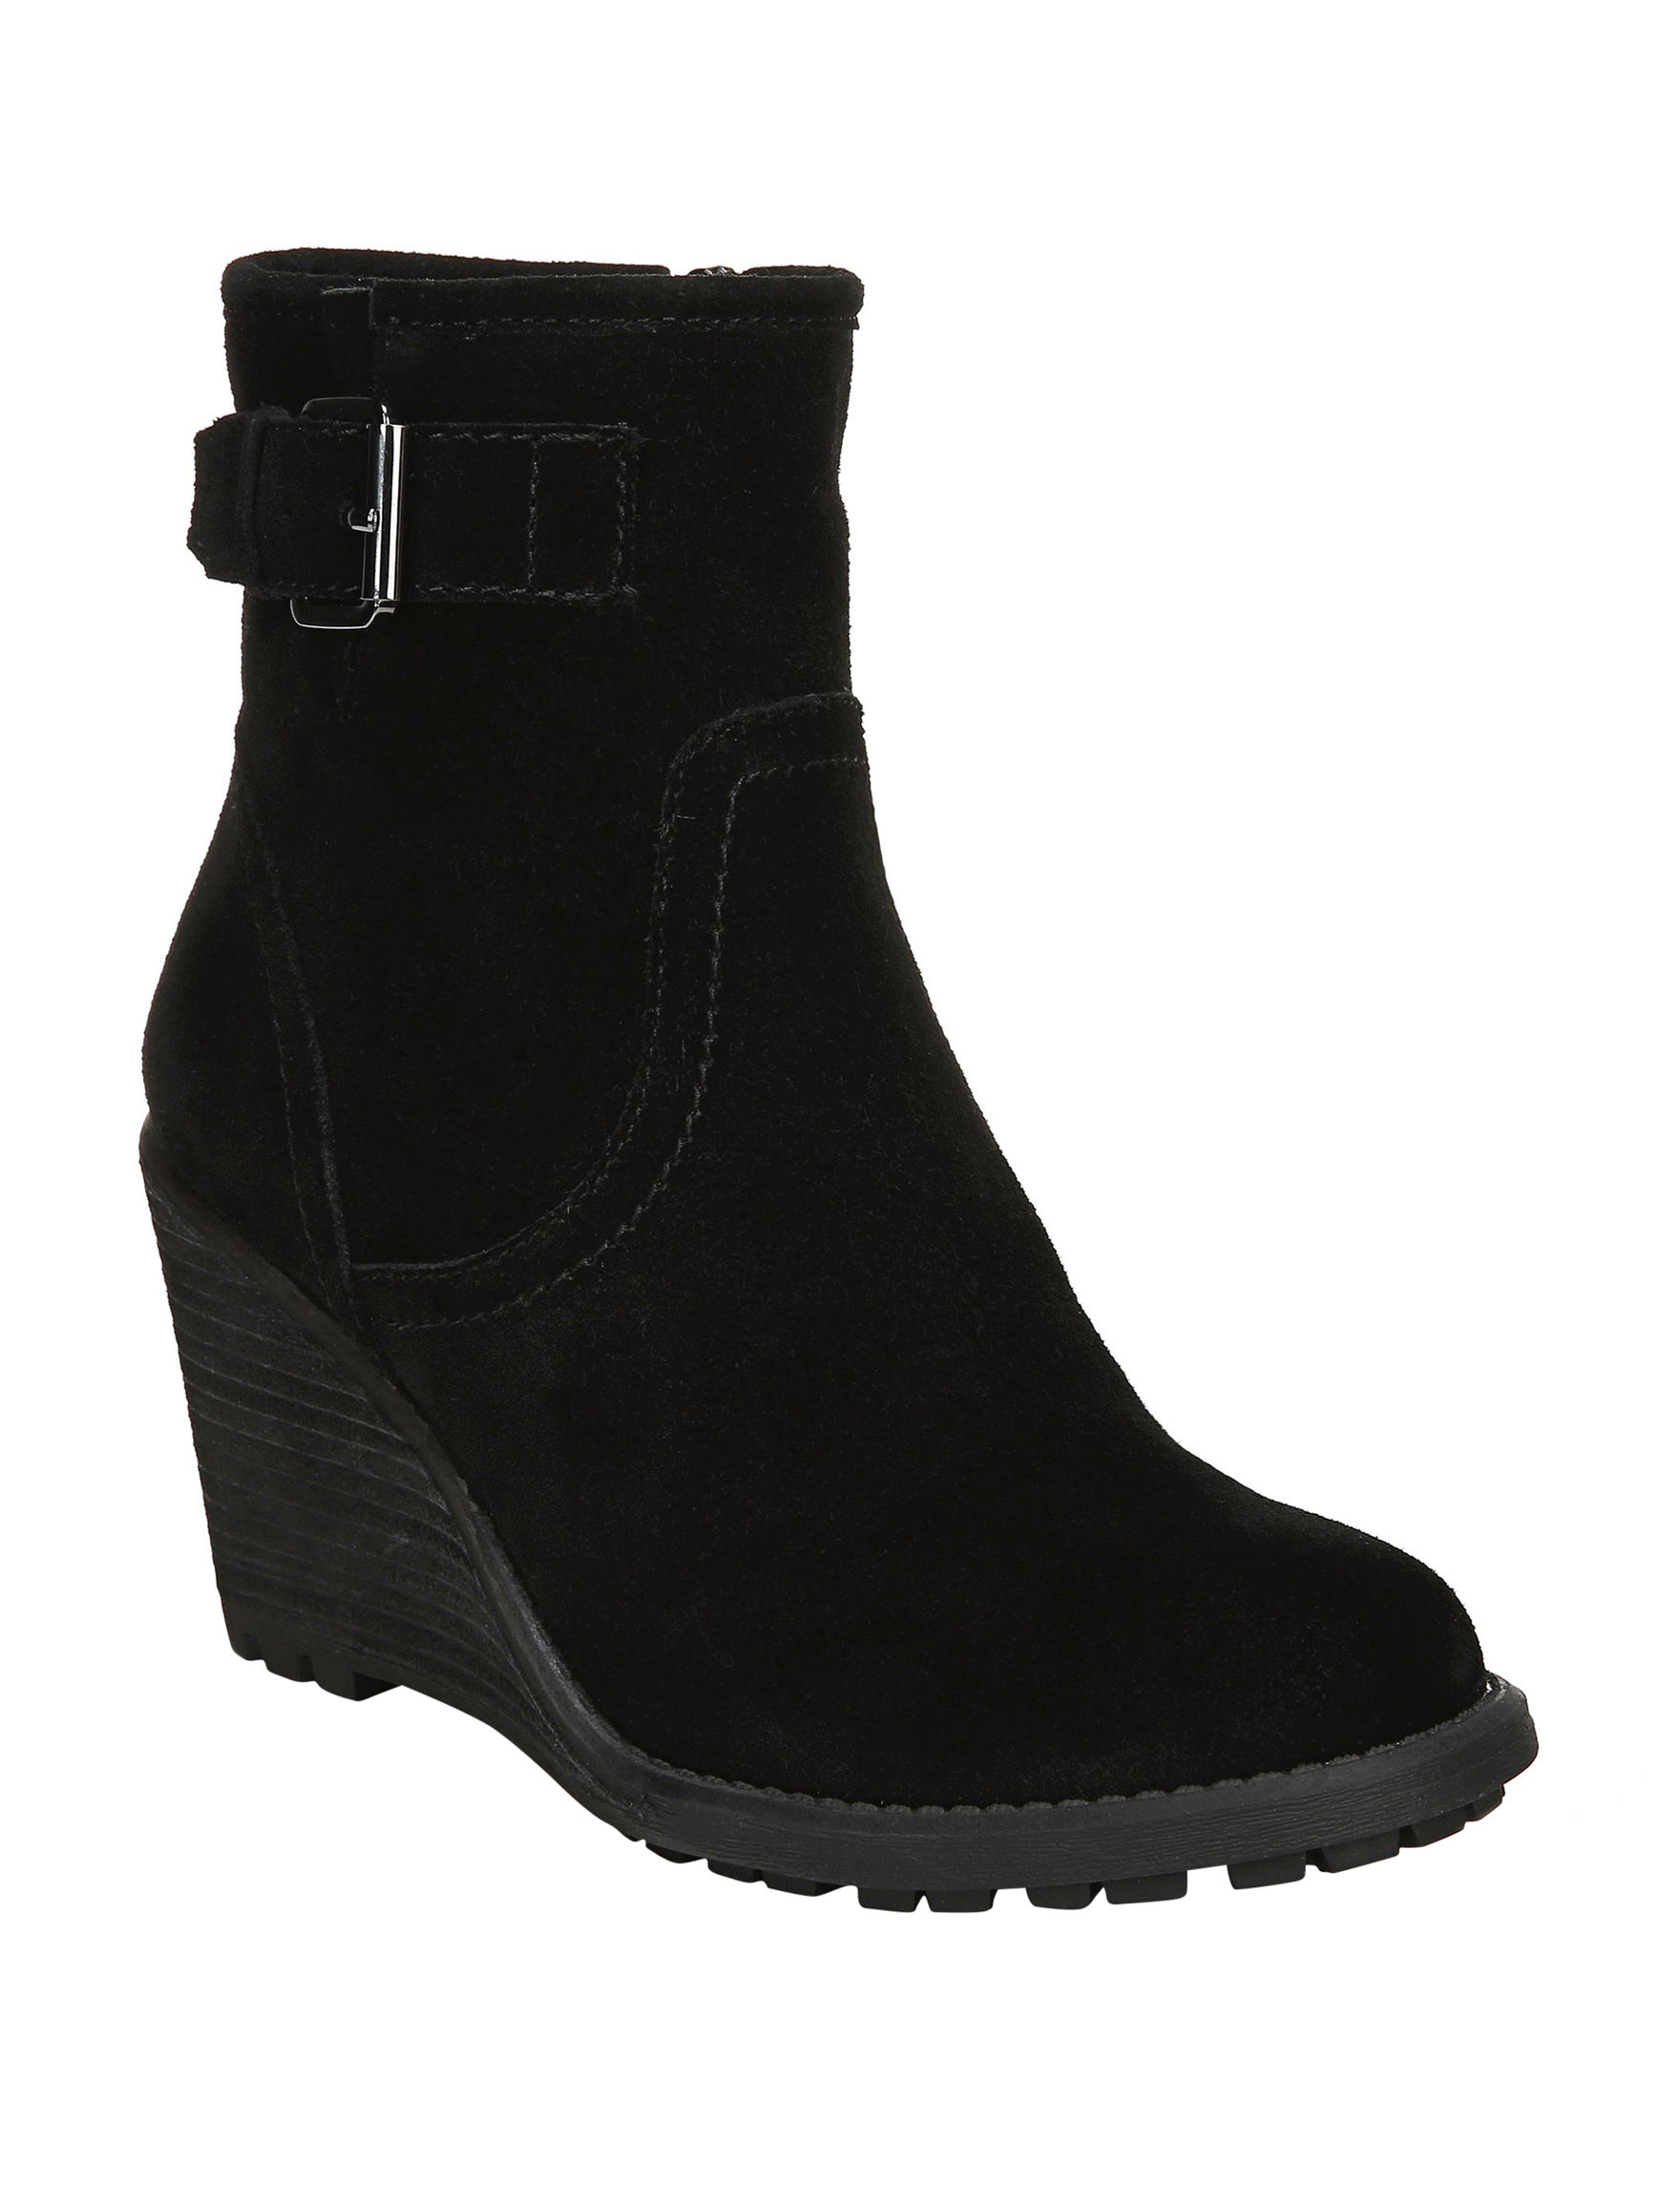 UPC 742976000447 product image for Carlos by Carlos Santana Women's Trace Buckle Wedge Boots - Black - 10 - Carlos  | upcitemdb.com